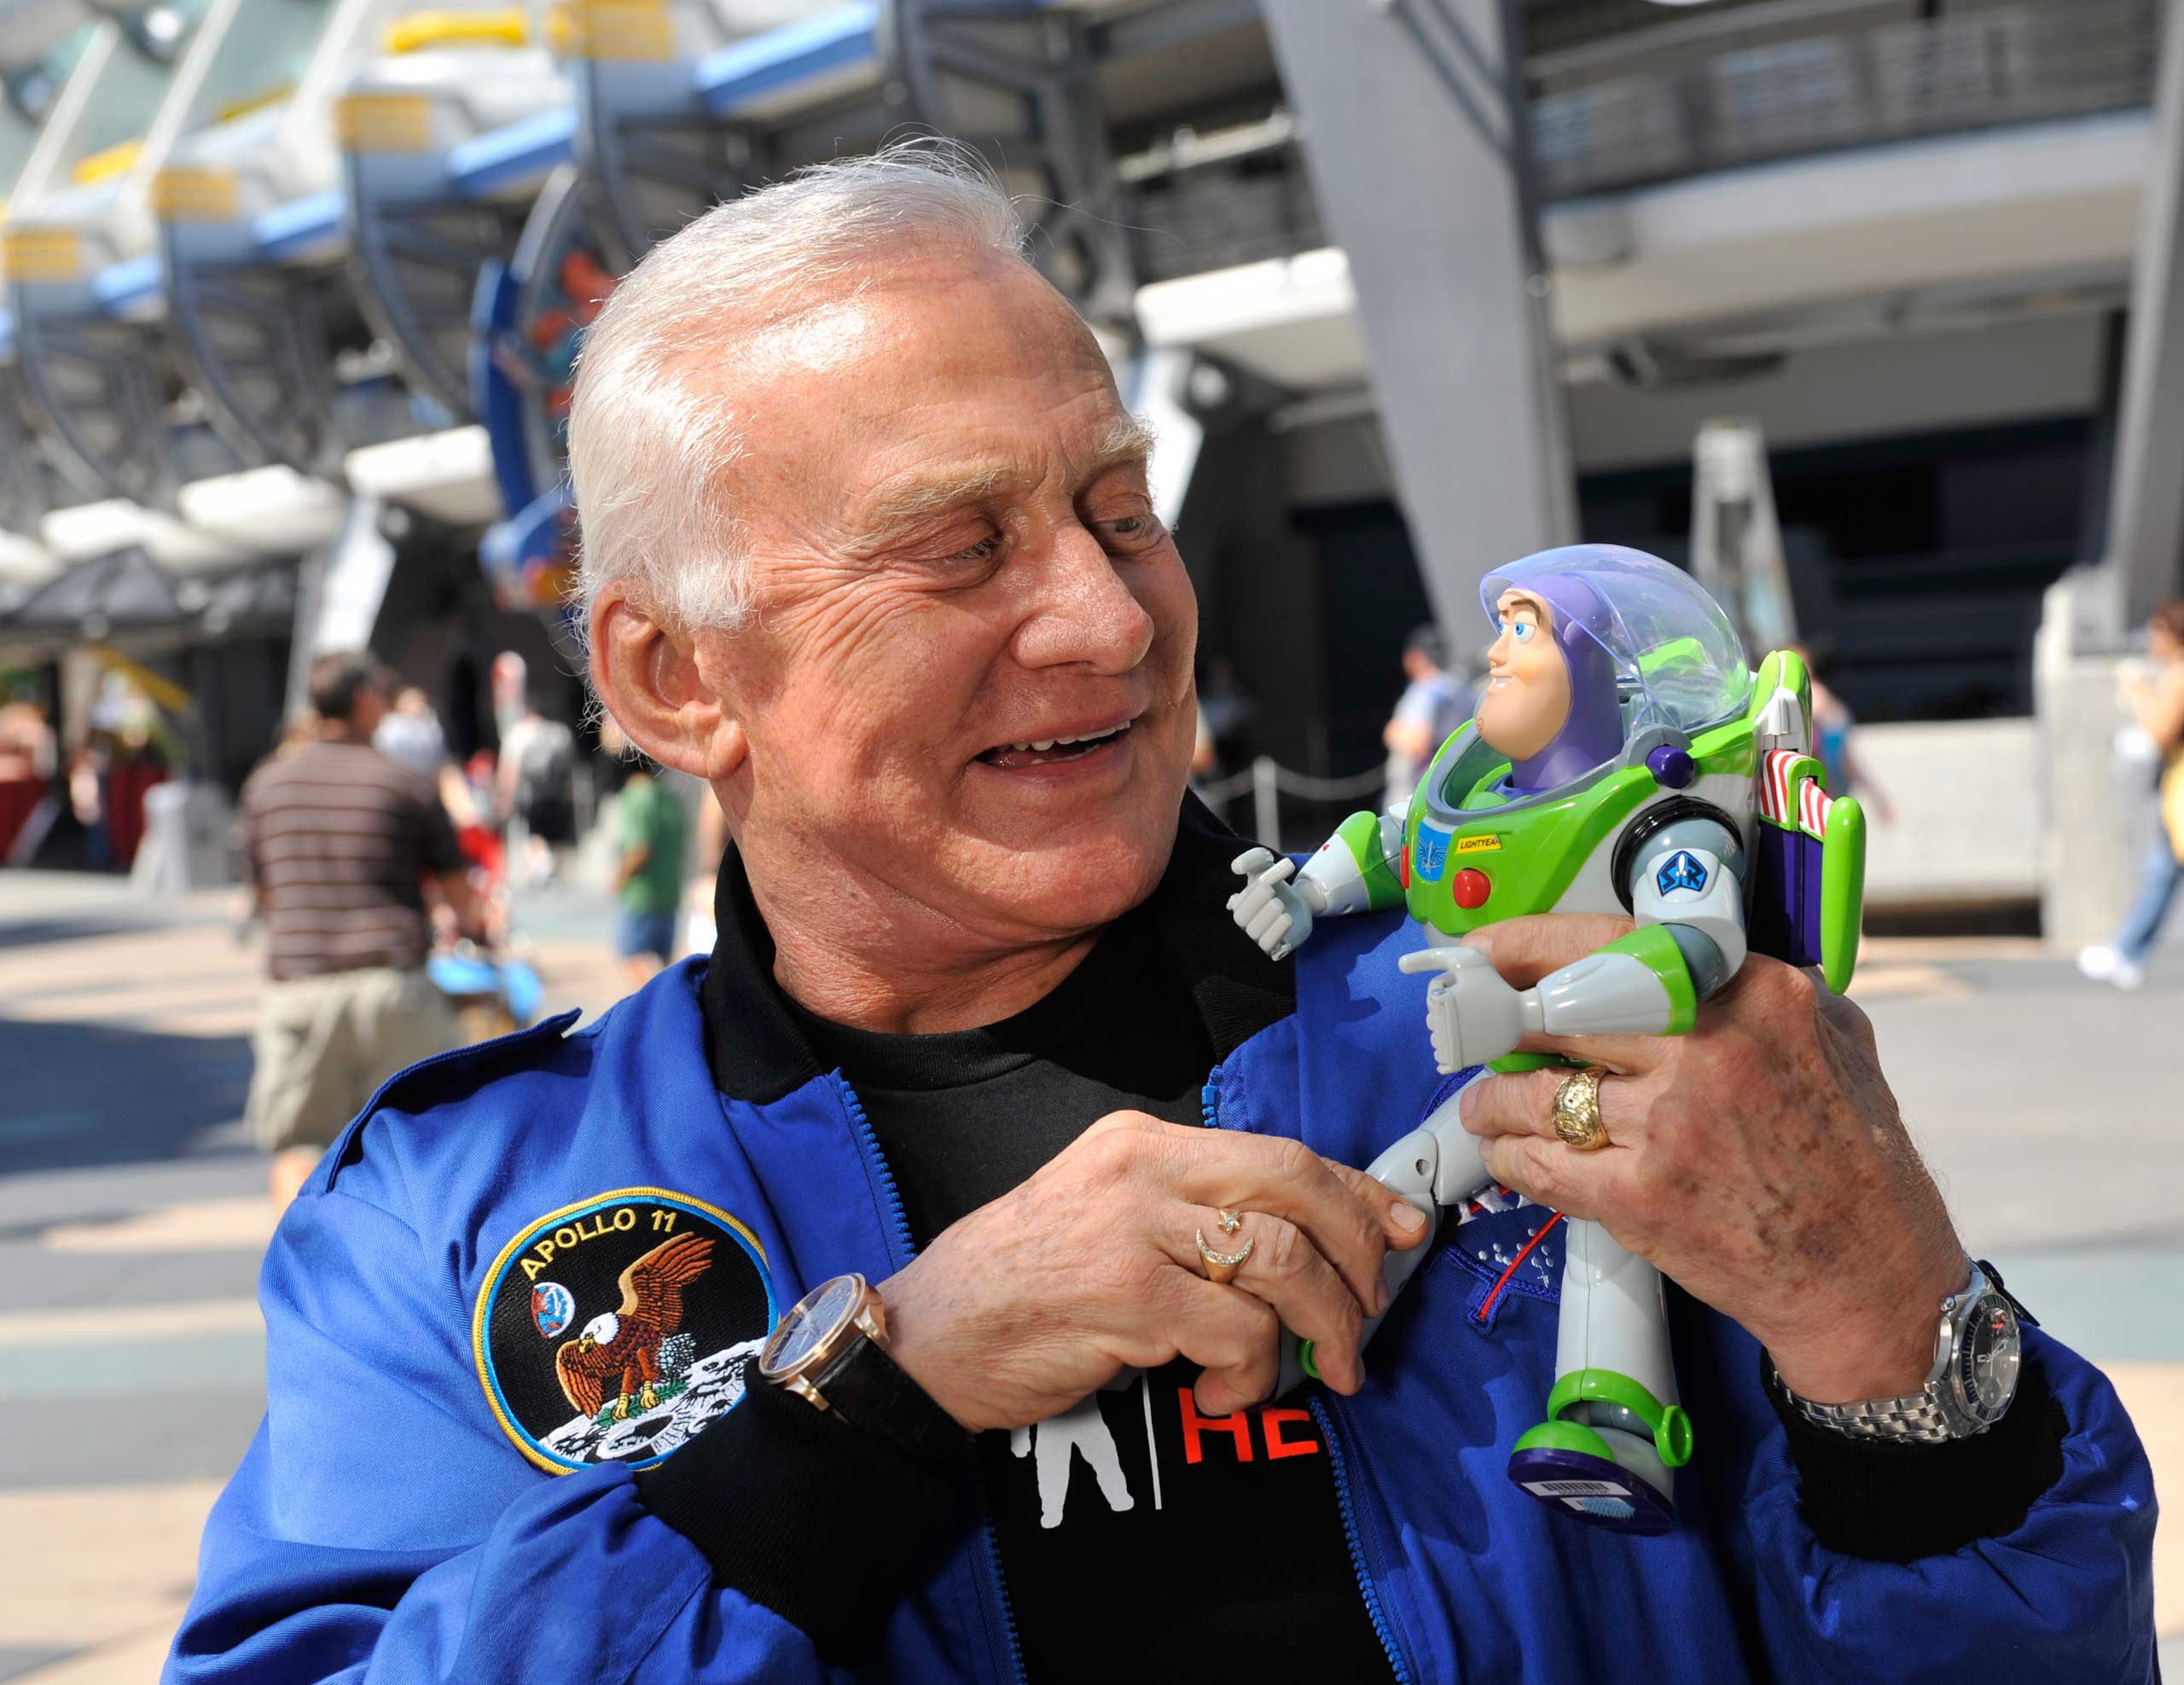 Buzz Aldrin's name was used as the inspiration for the 'Toy Story' character Buzz Lightyear. He says he has never received any endorsement fees or royalties for use of his name.